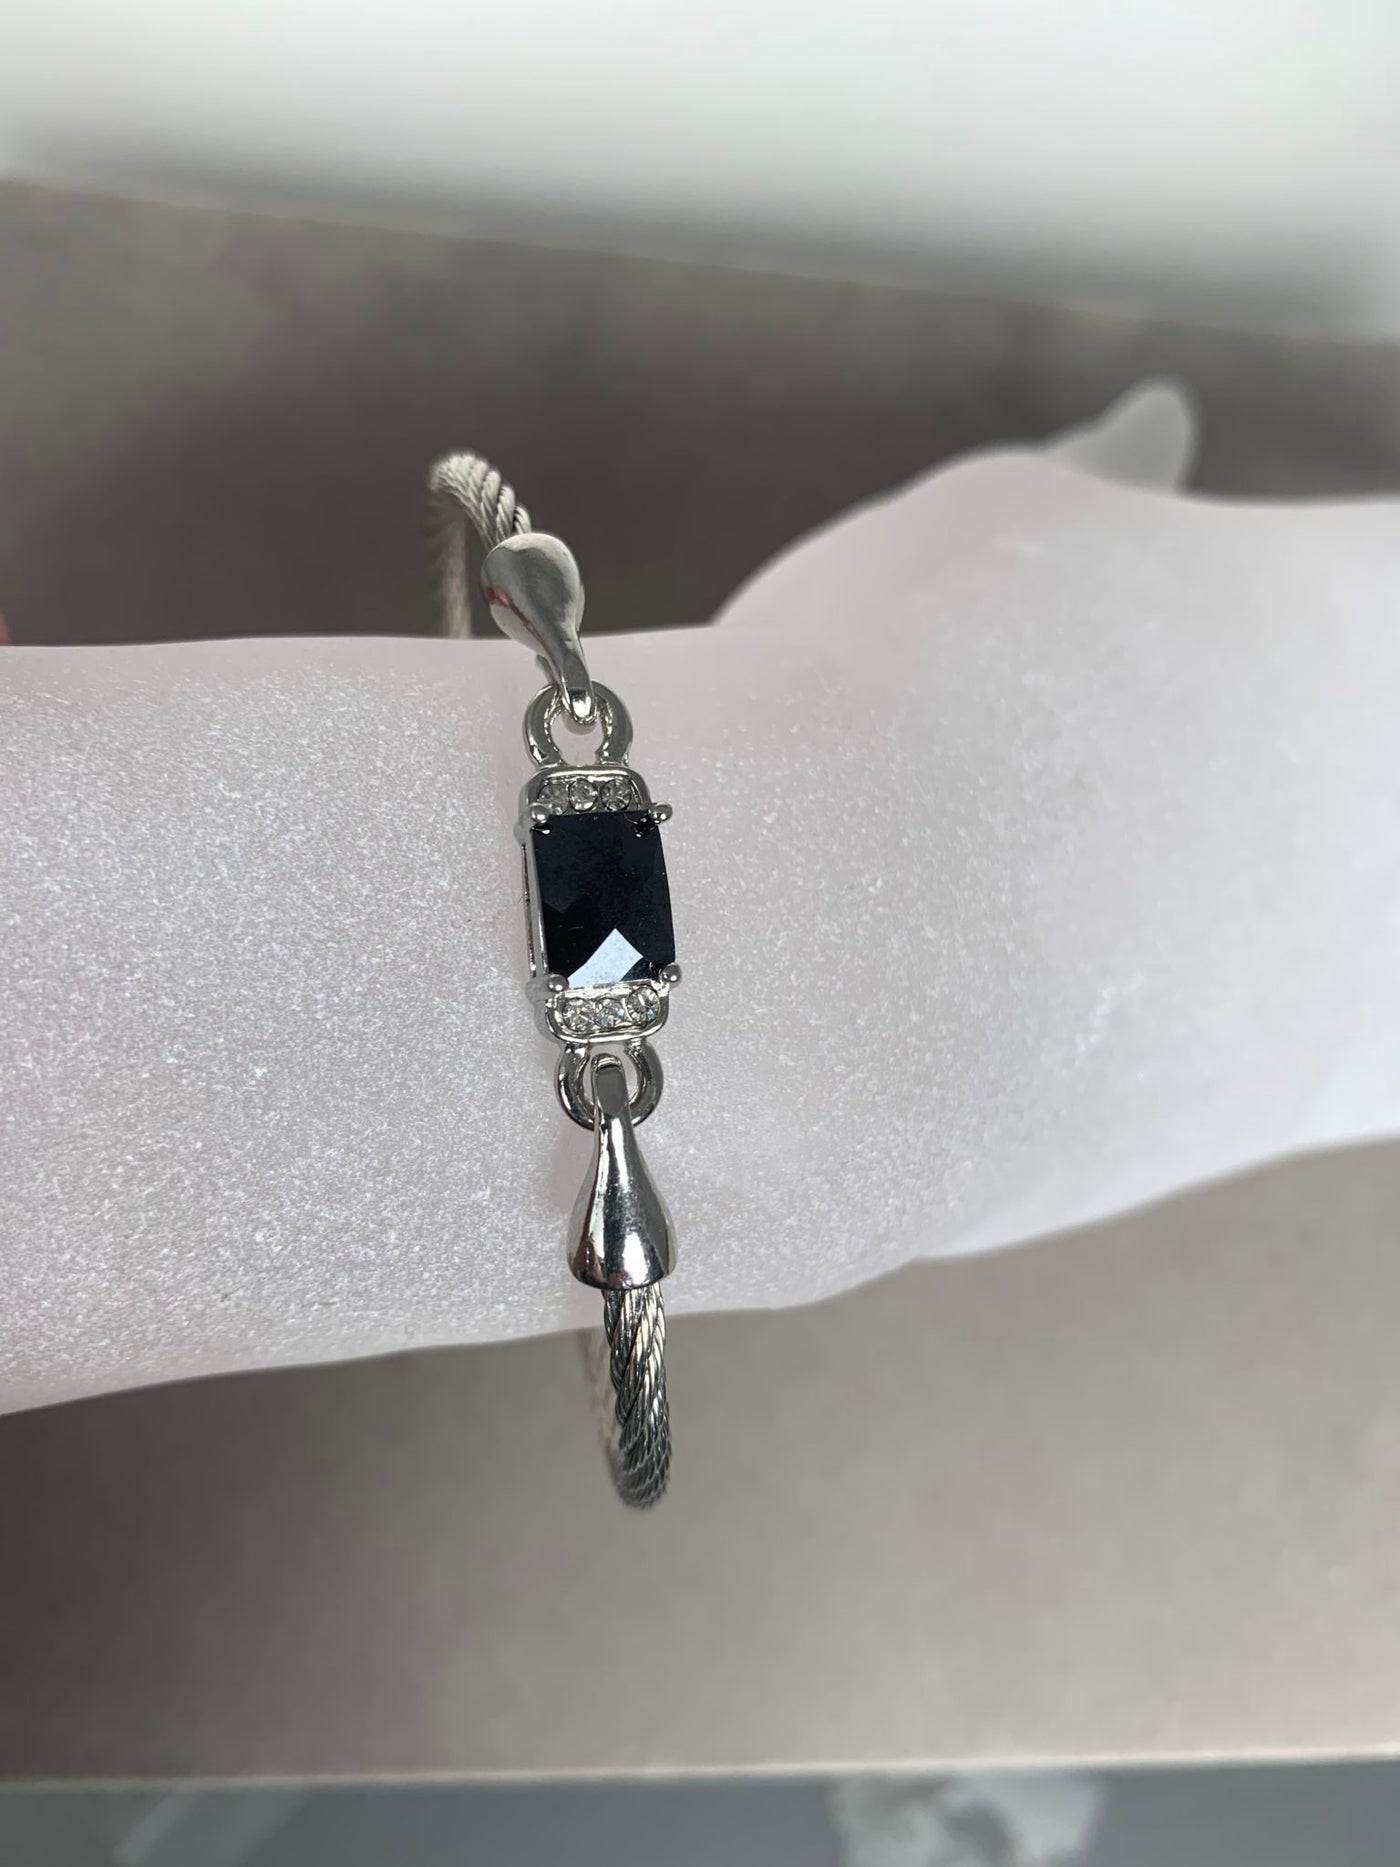 Silver Tone Wire Bangle Bracelet featuring Black Crystal